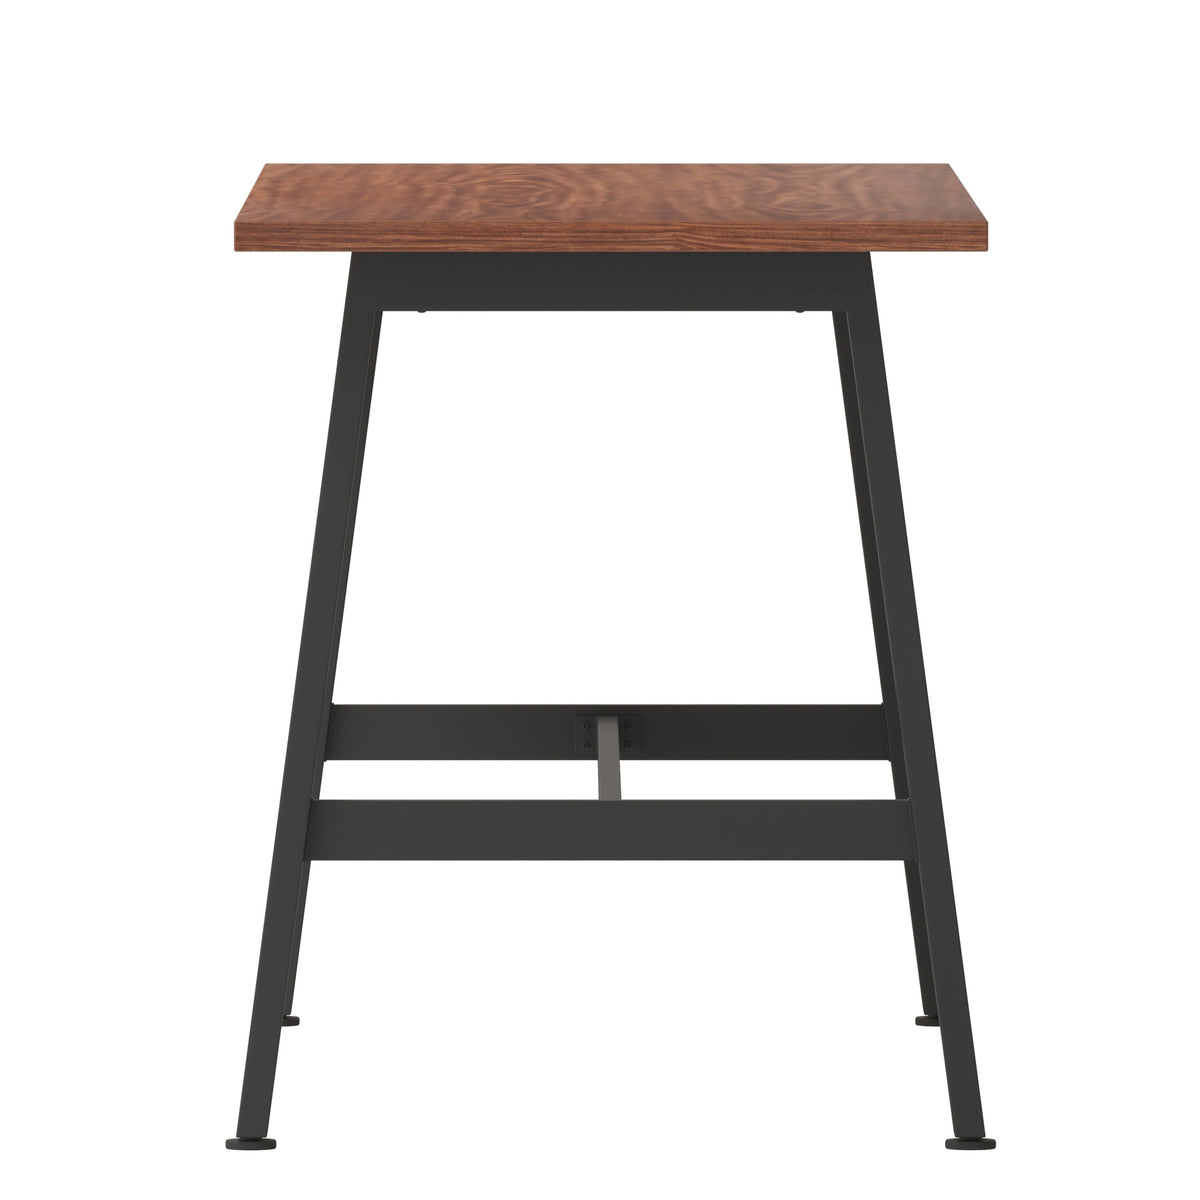 Walnut |#| Commercial 60x24 Conference Table with Laminate Top and A-Frame Base - Walnut